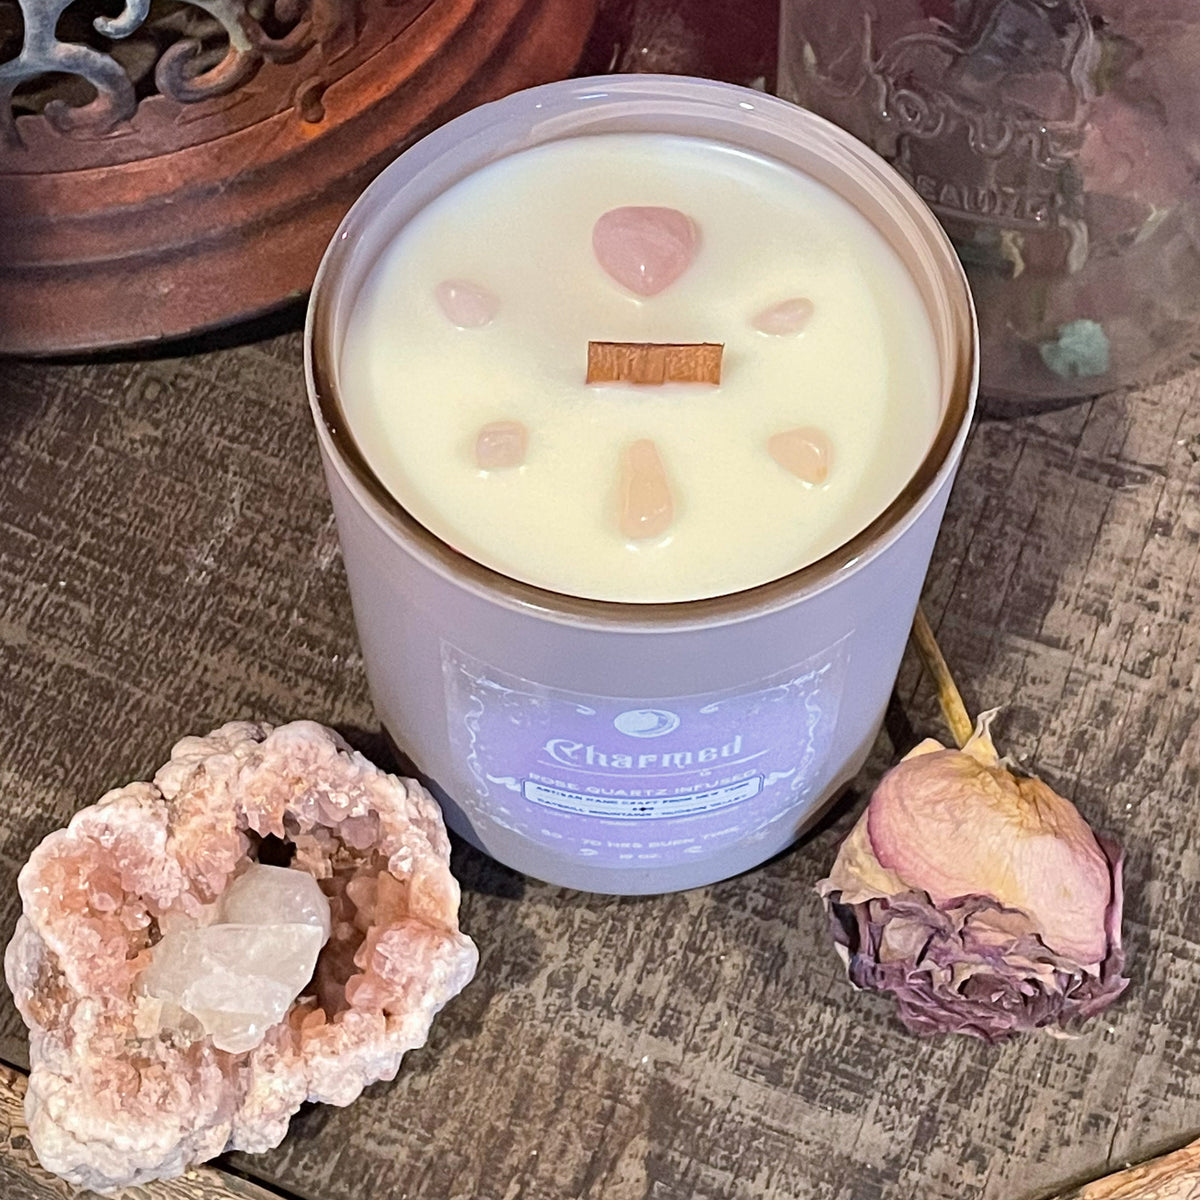 Spirited Collection - Charmed Candle